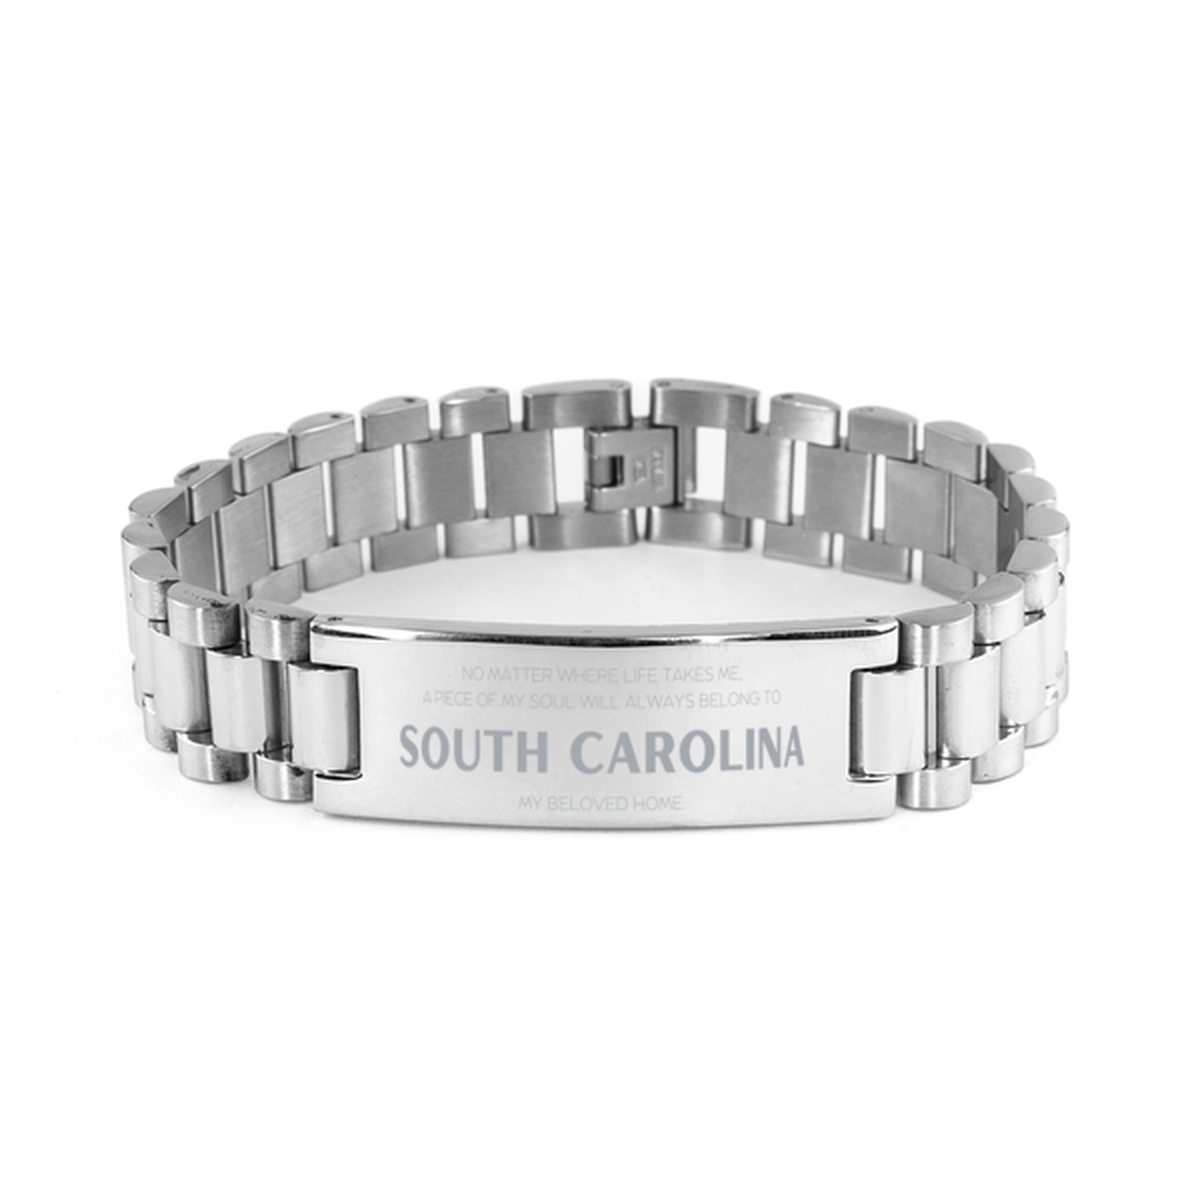 Love South Carolina State Gifts, My soul will always belong to South Carolina, Proud Ladder Stainless Steel Bracelet, Birthday Unique Gifts For South Carolina Men, Women, Friends